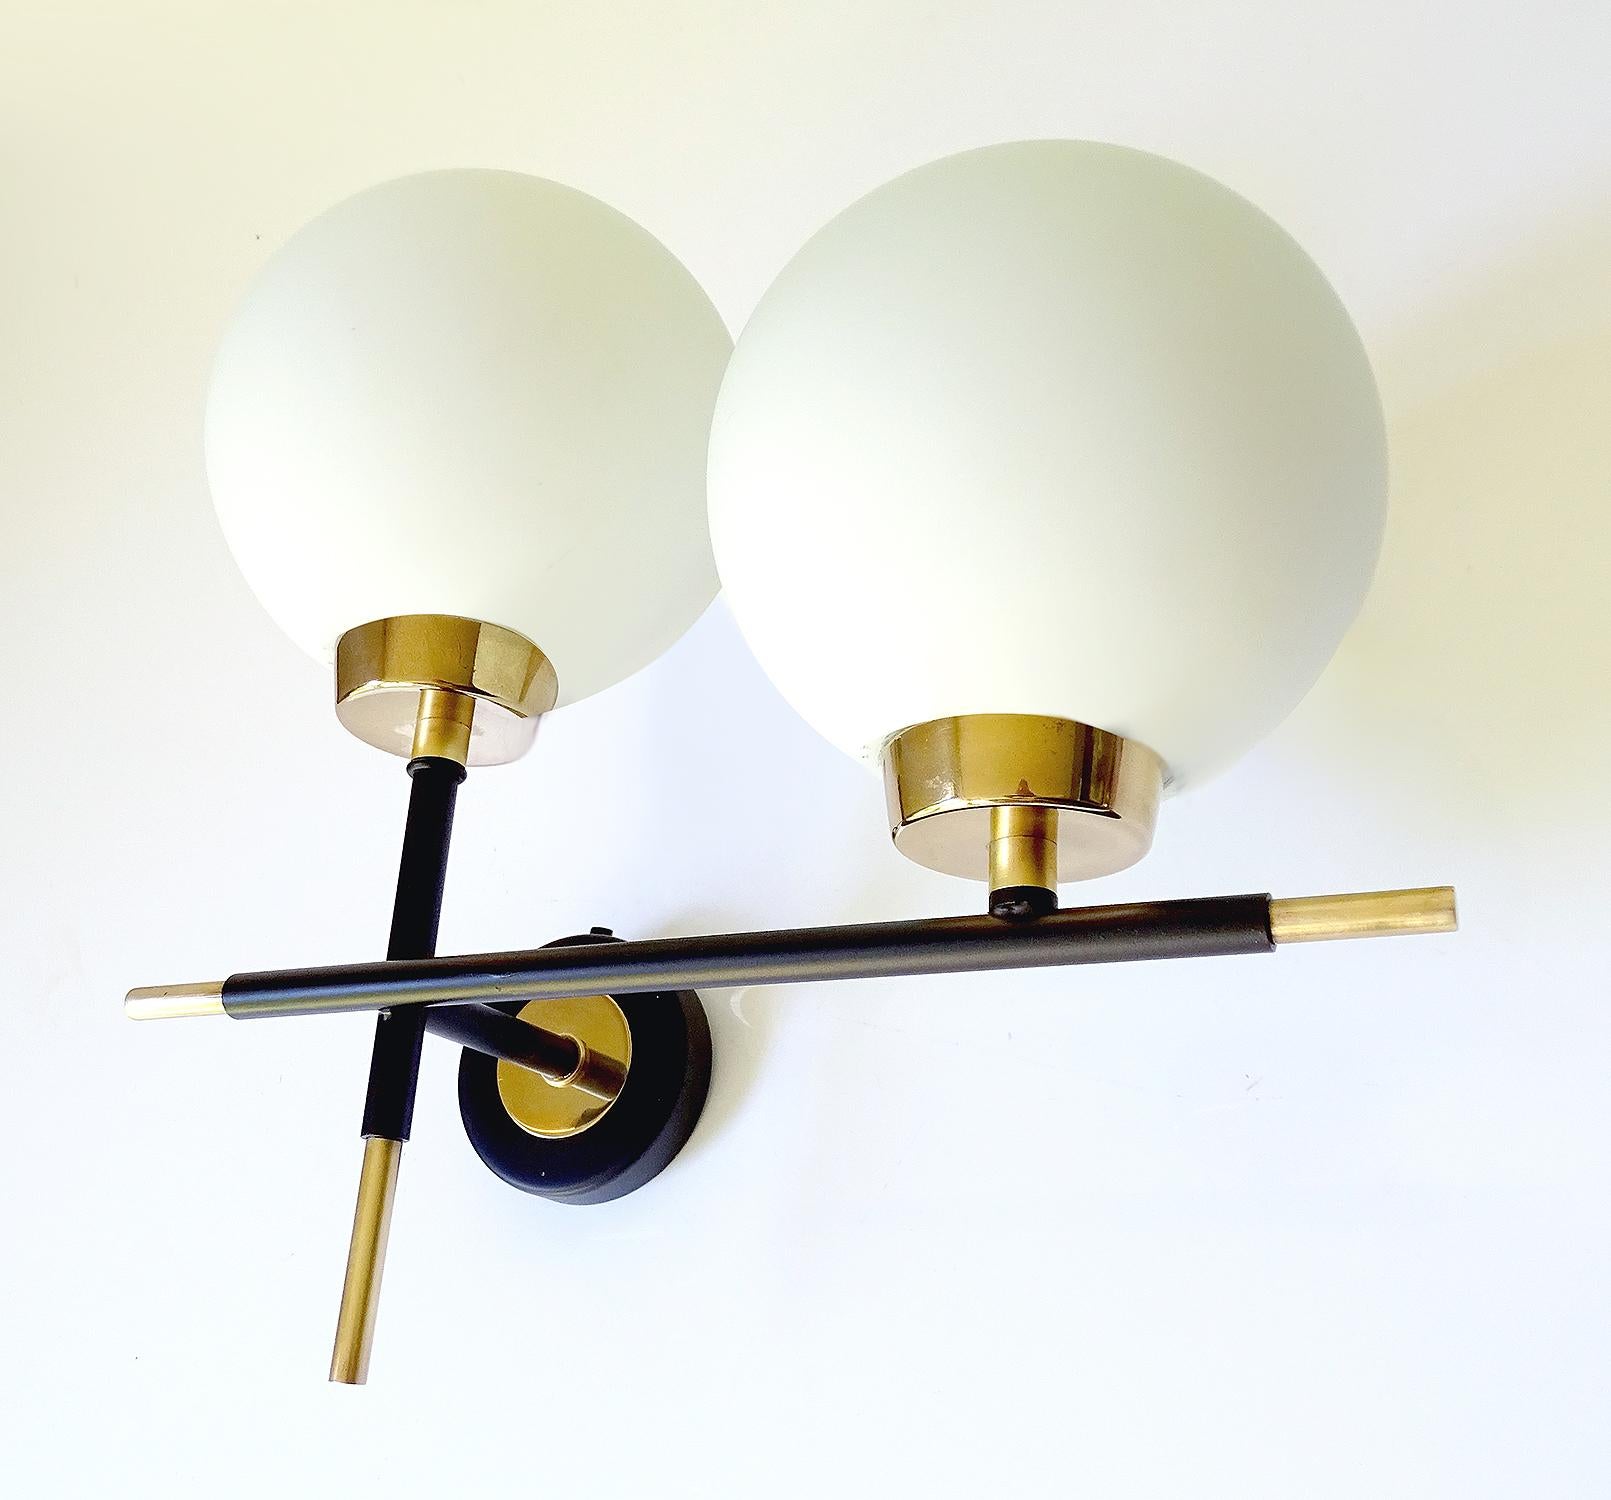  Pair French Mid Century  Sconces, Lunel France, 1960s, Stilnovo Style For Sale 7